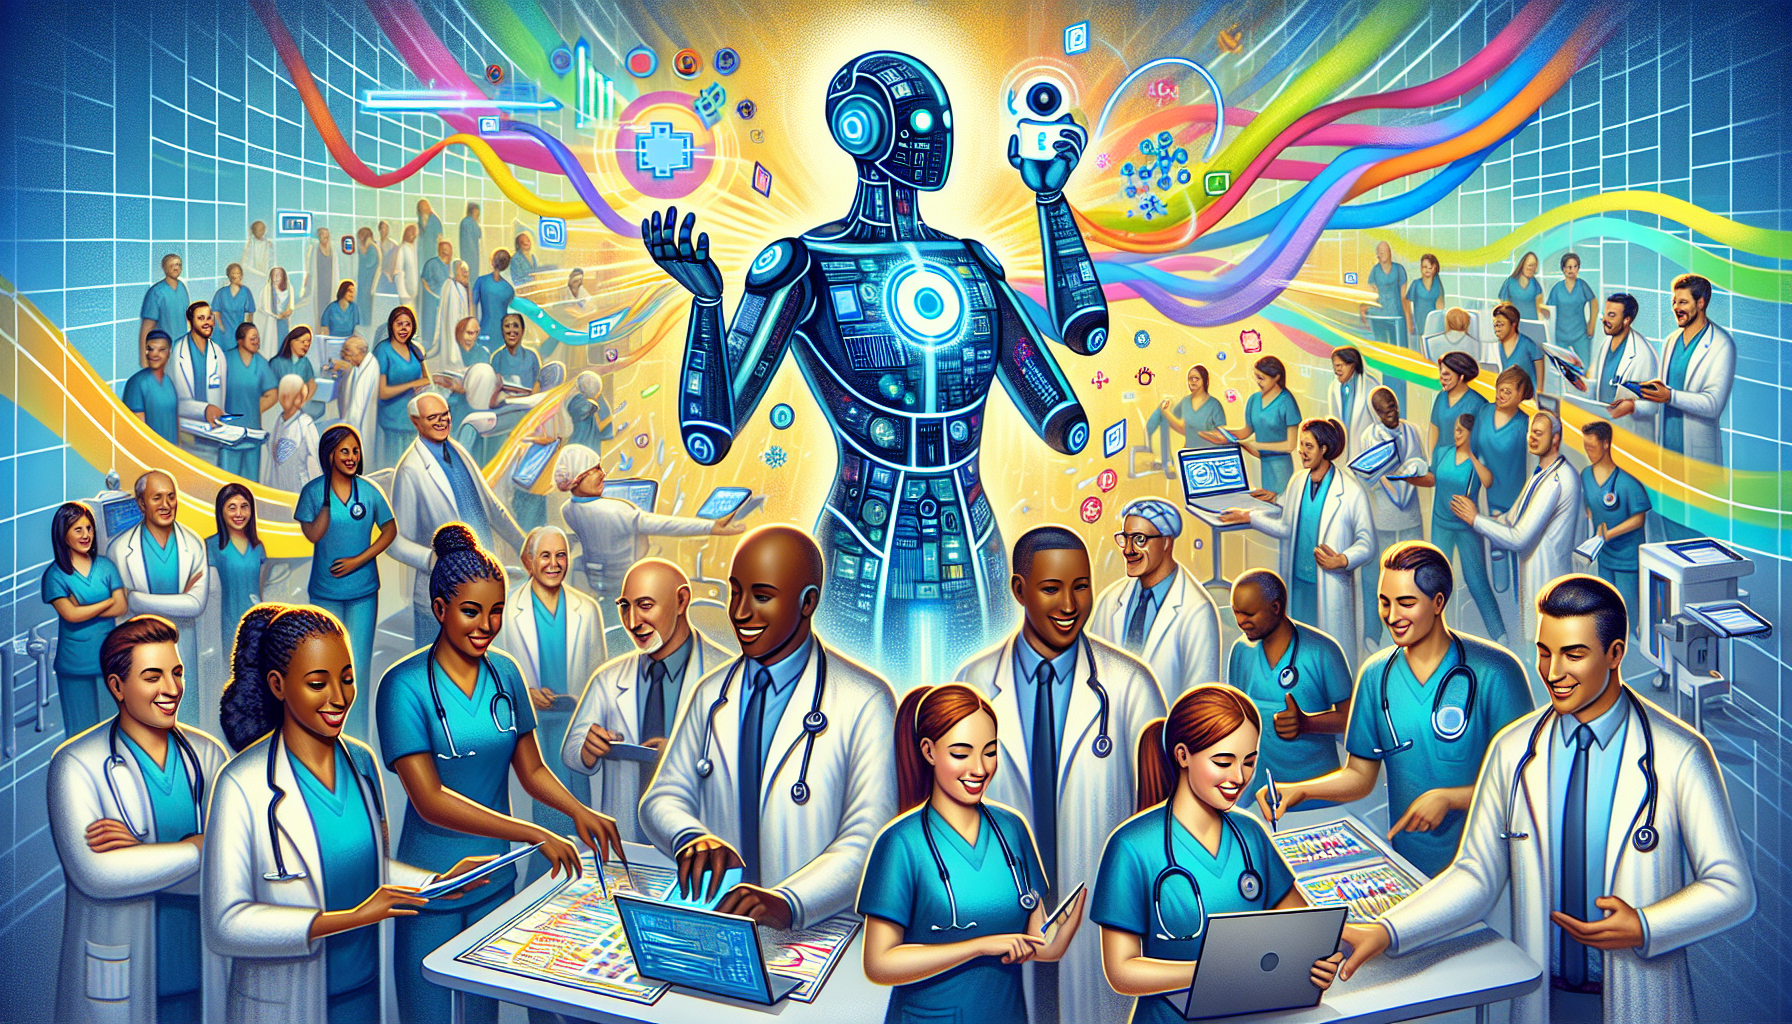 A whimsical illustration highlighting the integration of AI into clinical workflows